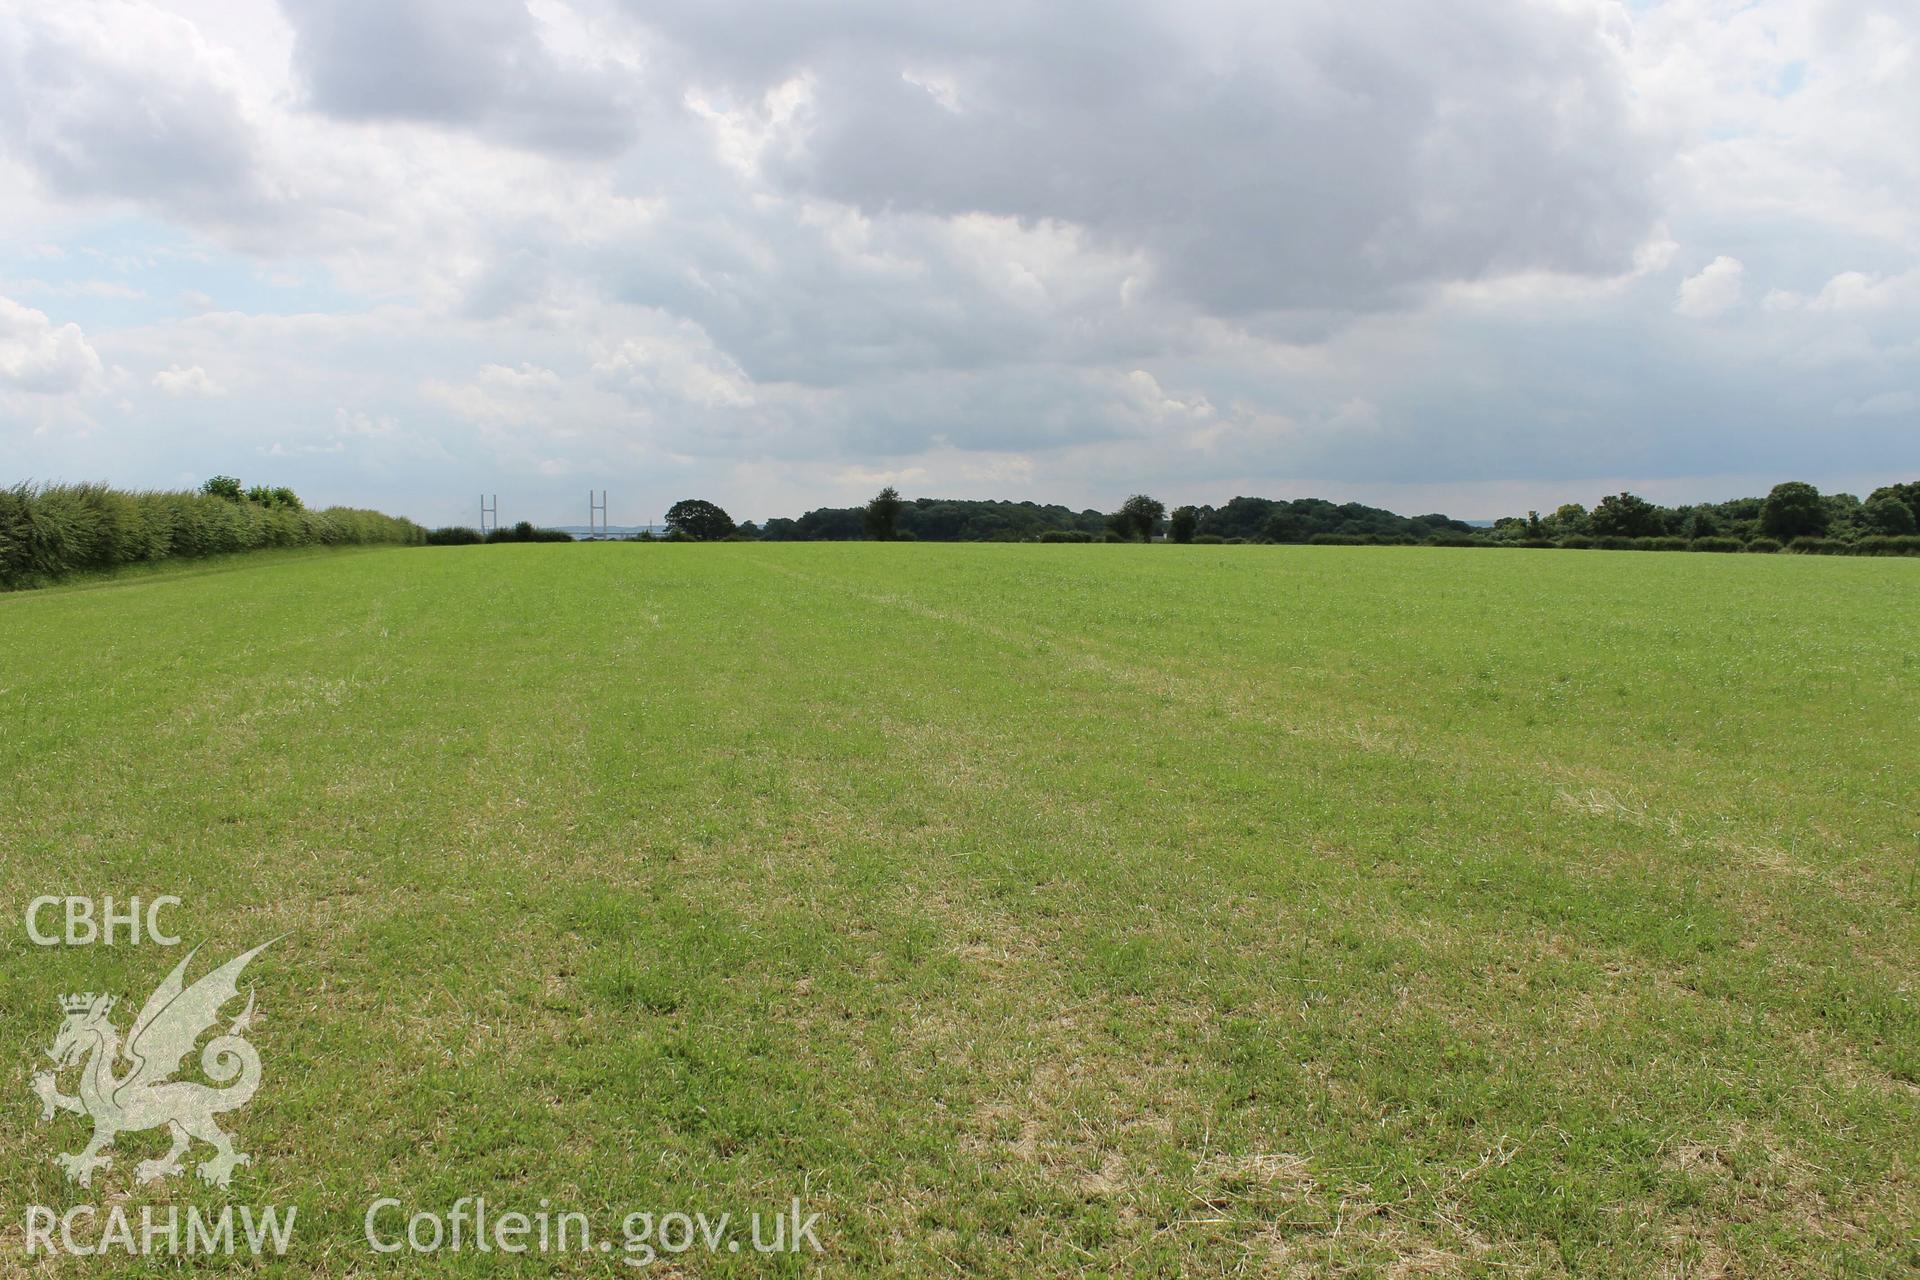 Digital photograph looking south east along the north eastern boundary of Field 1. Photographed as part of archaeological desk based assessment and geophysical survey of Oak Grove Farm, Crick, Monmouthshire, carried out by Archaeology Wales, 2015.